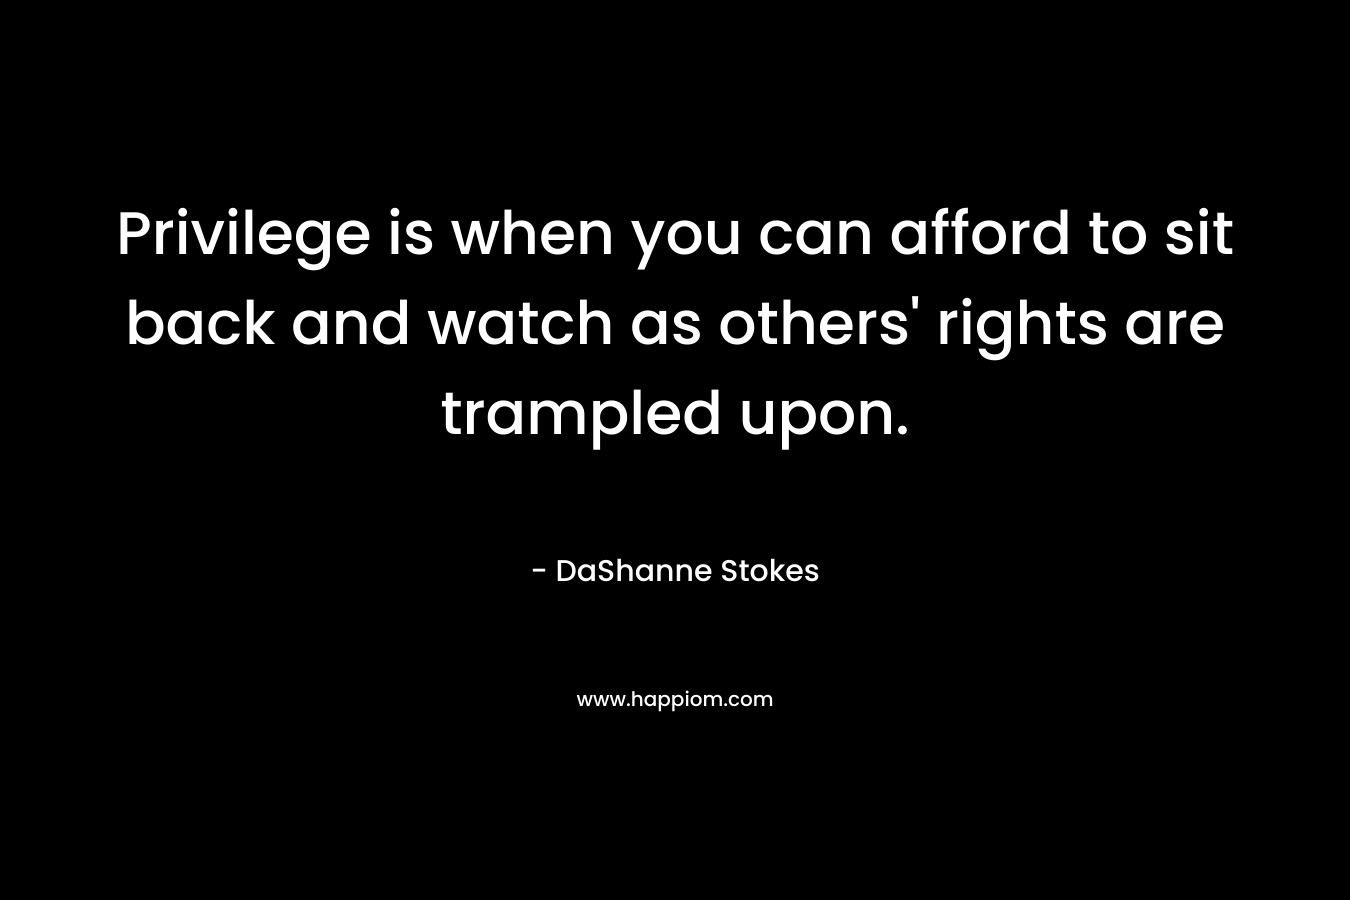 Privilege is when you can afford to sit back and watch as others’ rights are trampled upon. – DaShanne Stokes